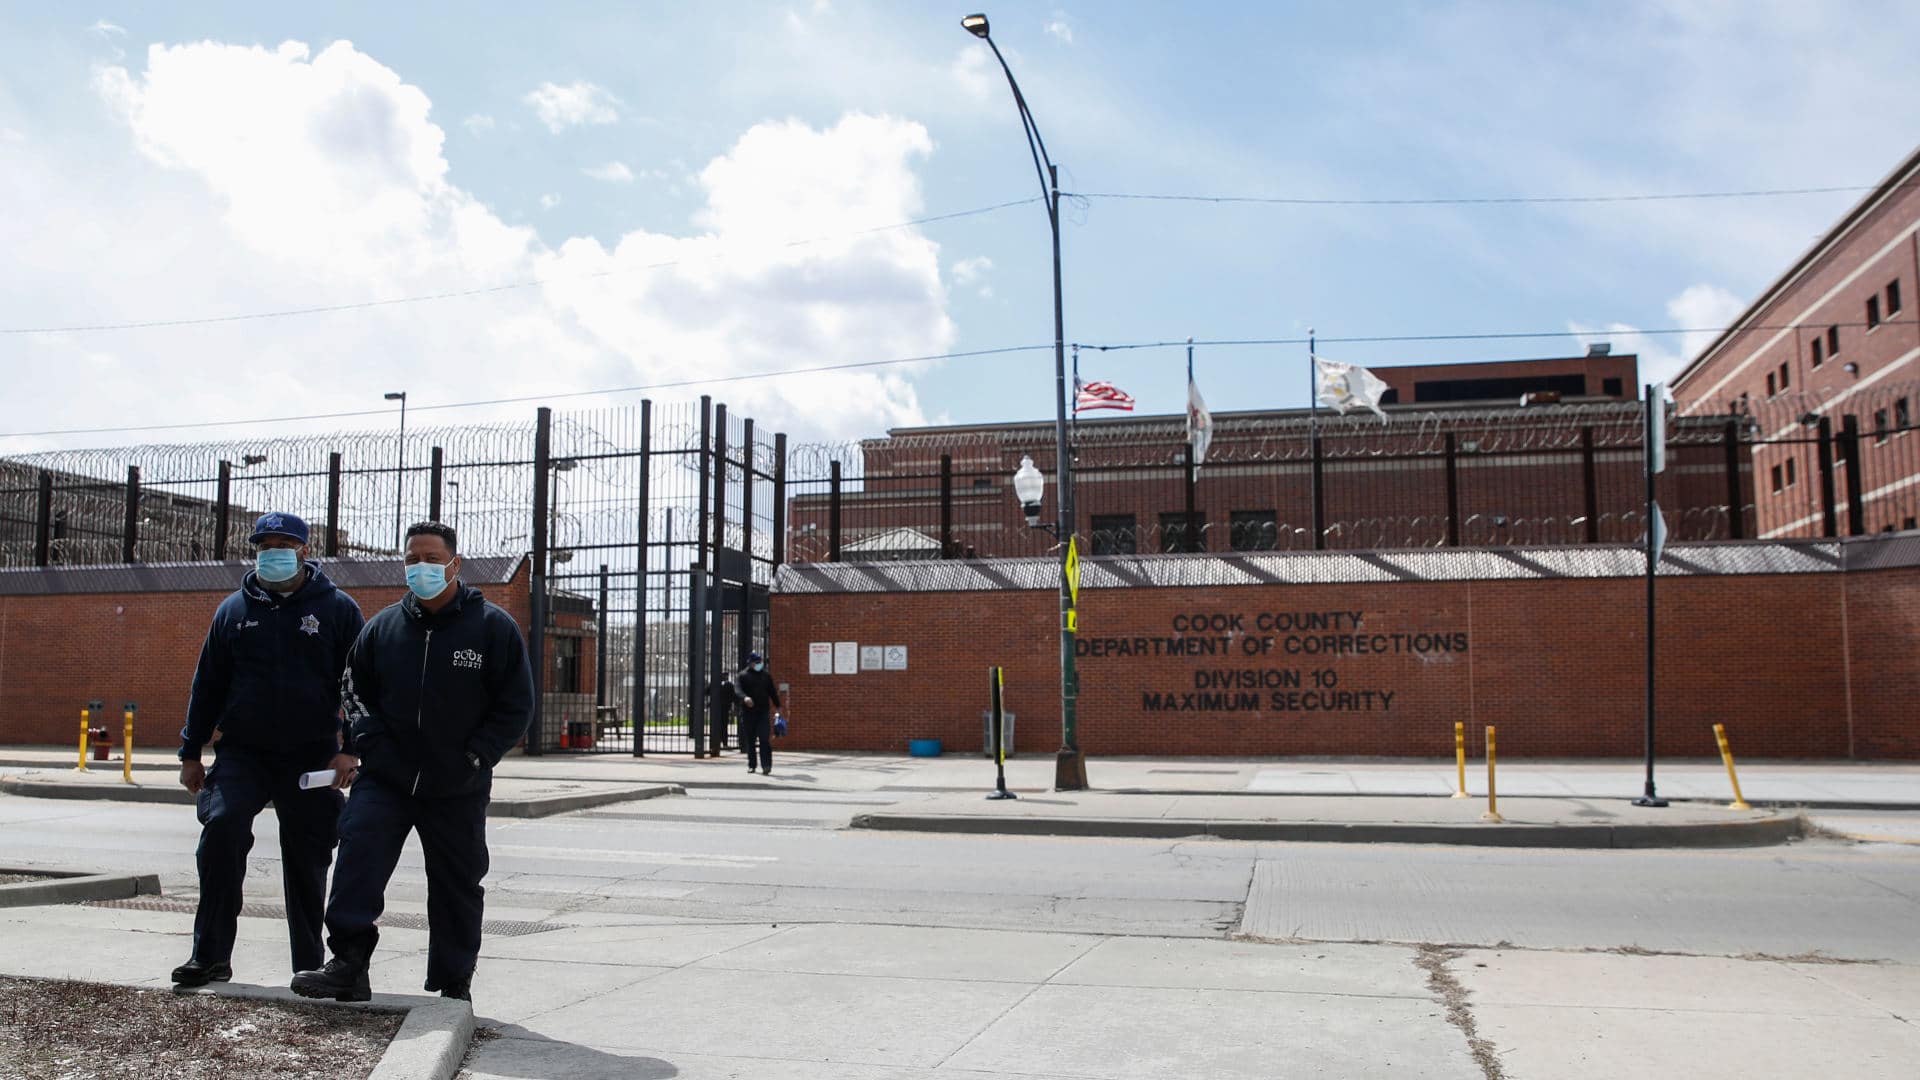 The Cook County Department of Corrections in Chicago, Illinois, is the largest single-site jail in the country.